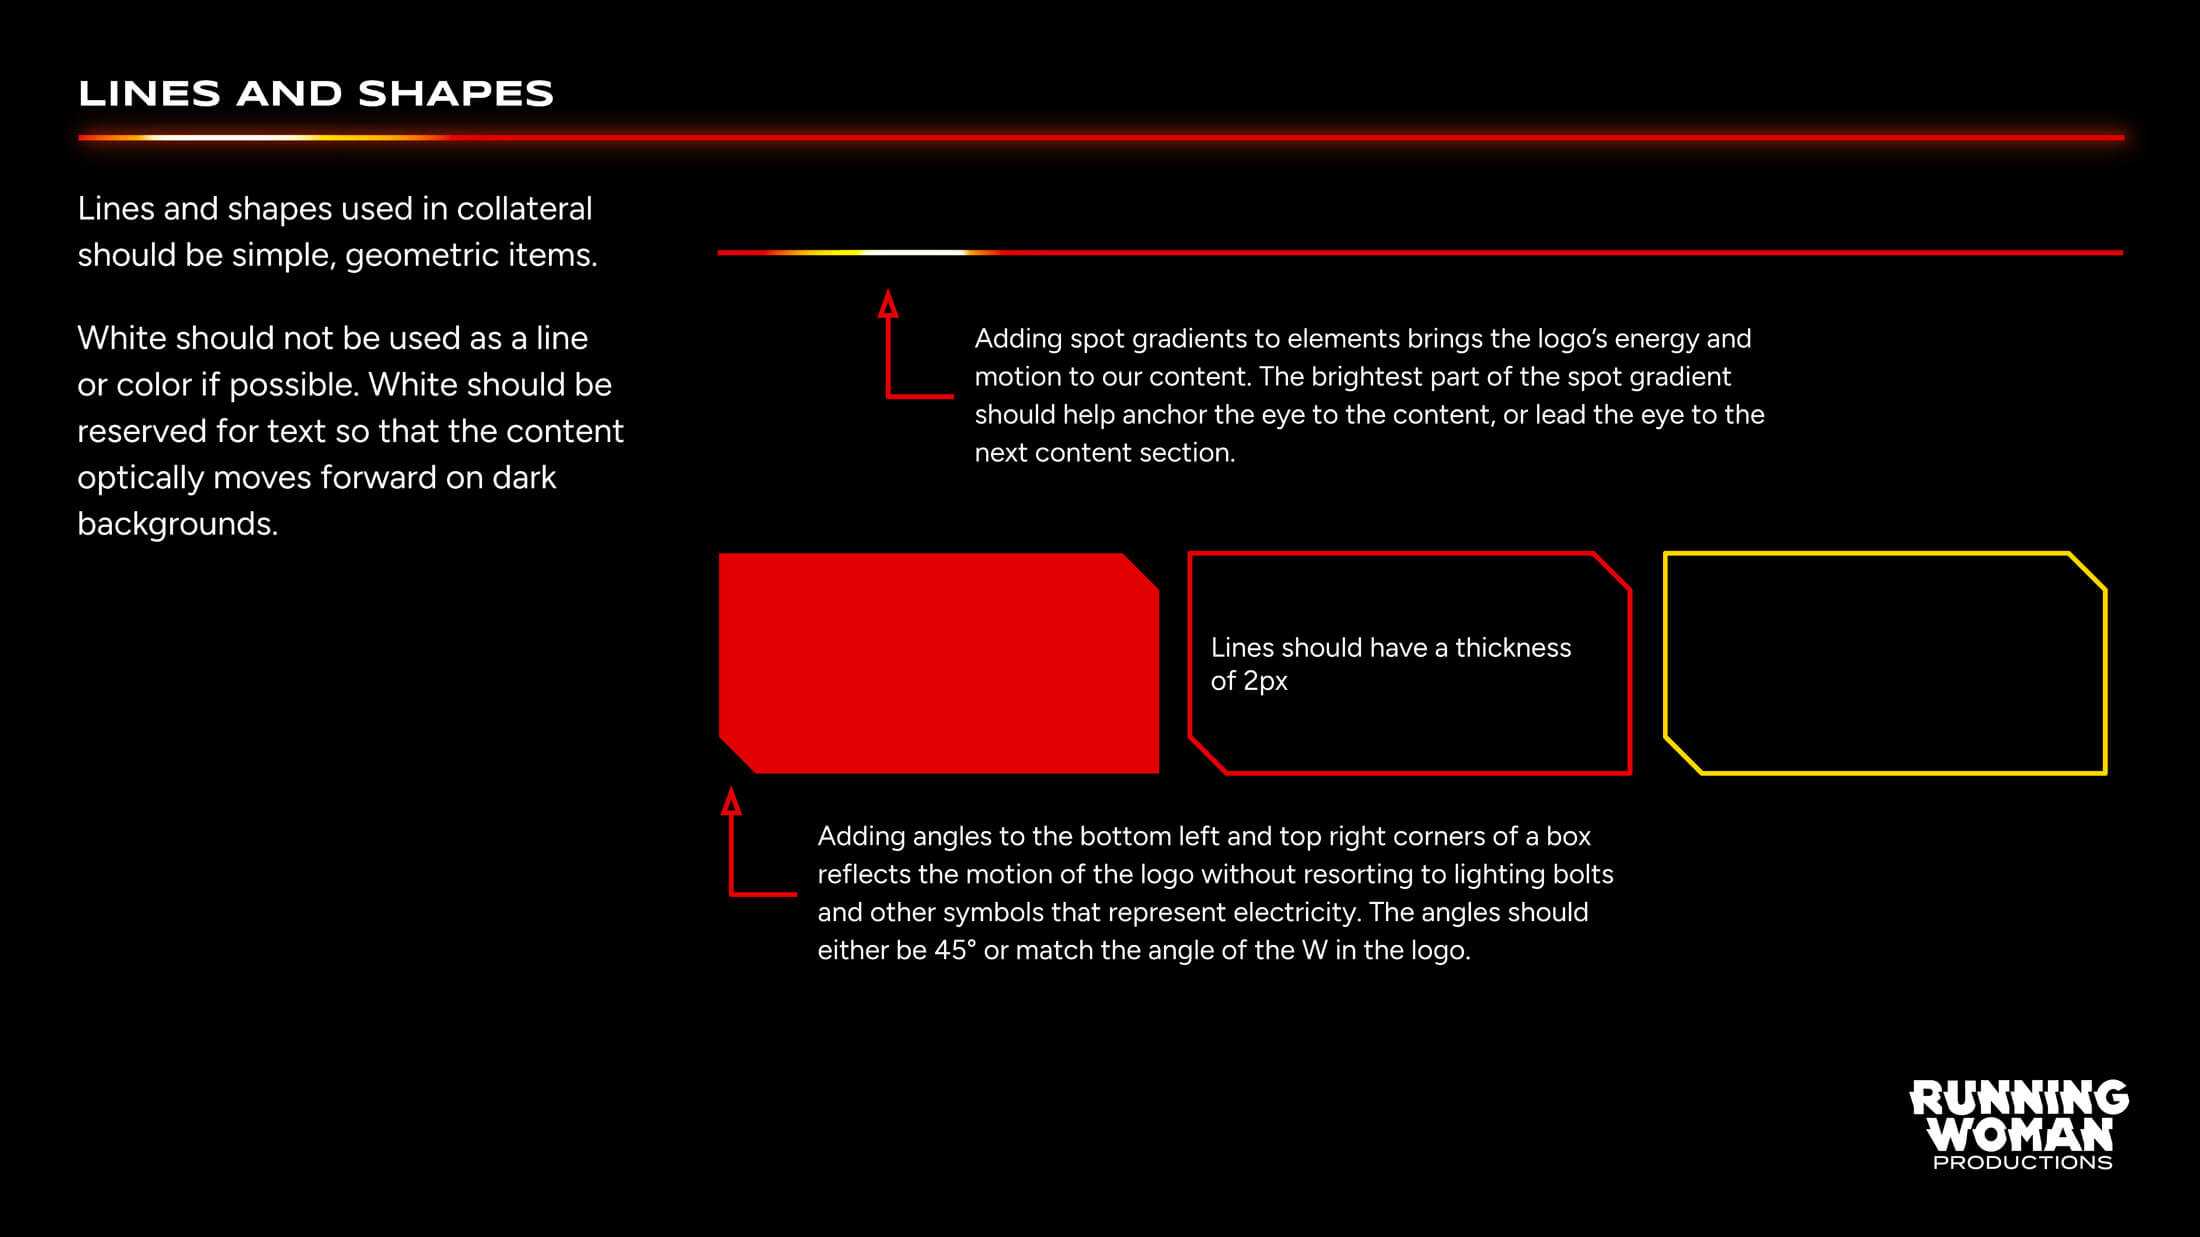 Section of Running Woman Productions brand guidelines discussing use of lines and shapes.